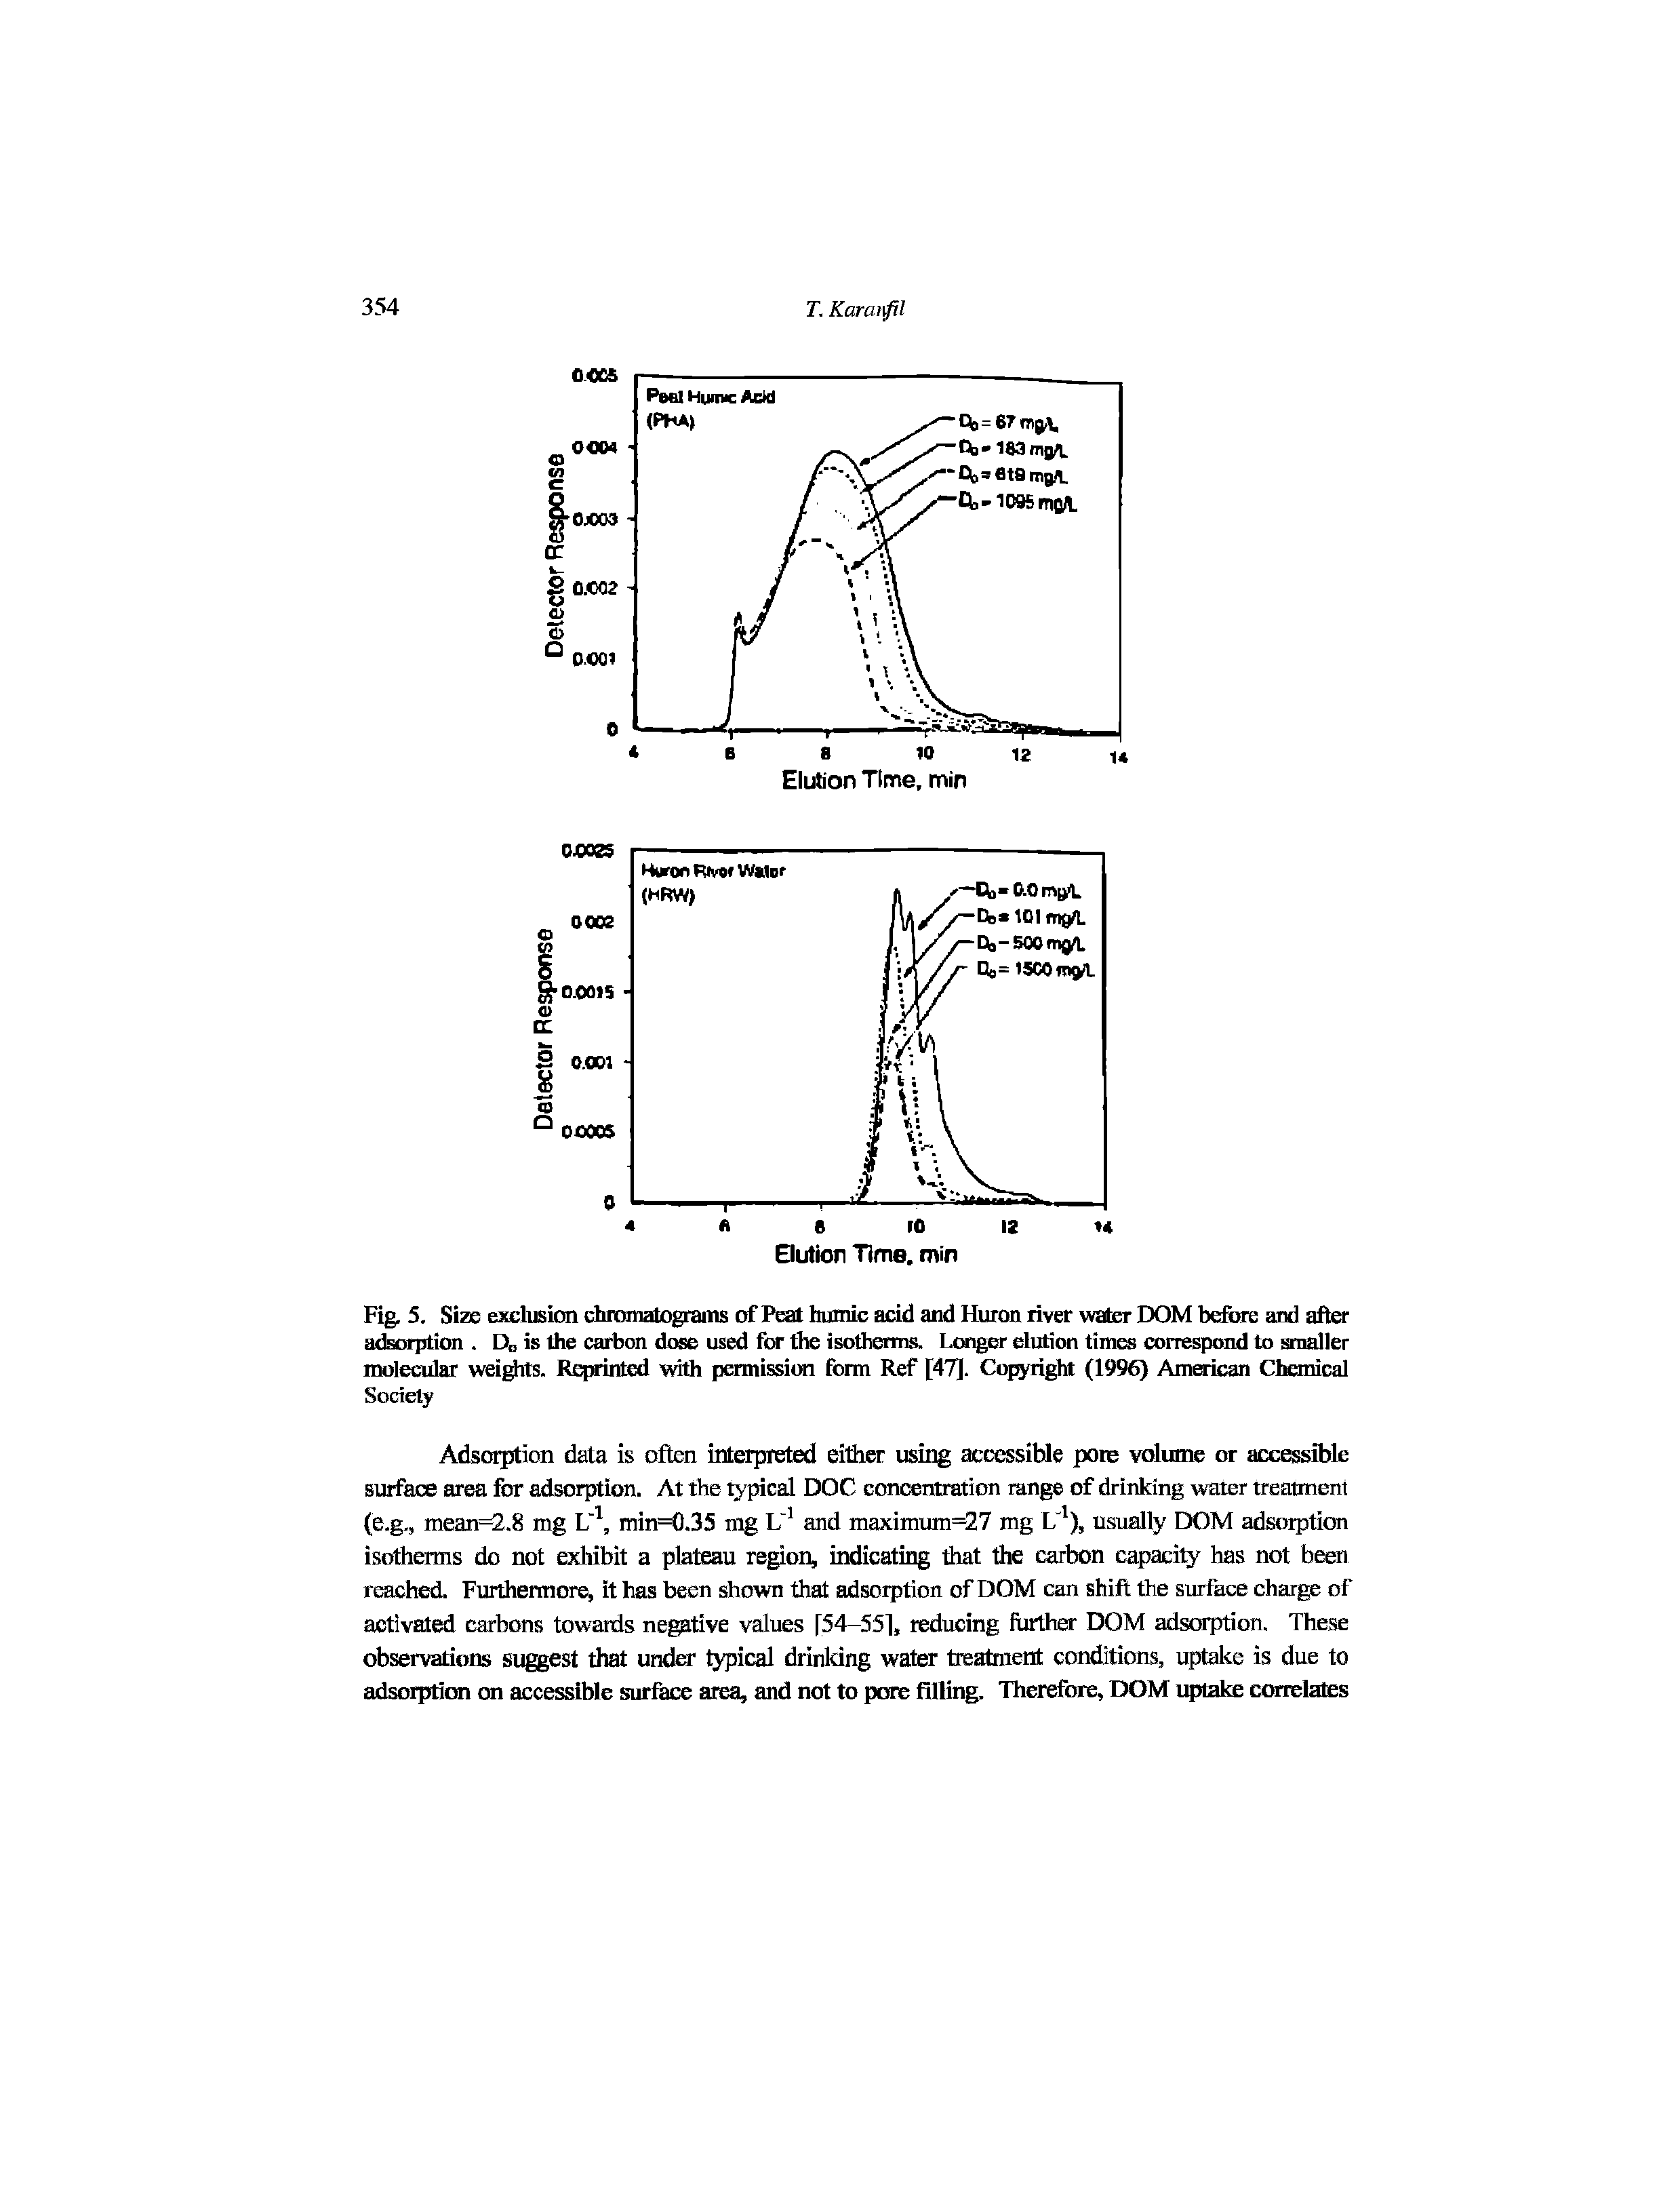 Fig. 5. Size exclusion chromatograins of Prat humic acid and Huron river water DOM before and after adsorption. D is the carbon dose used for the isotherms. Longer elution times correspond to smaller molecular weights. Reprinted with permission form Ref [47]. Coj fright (1996) American Ctanical...